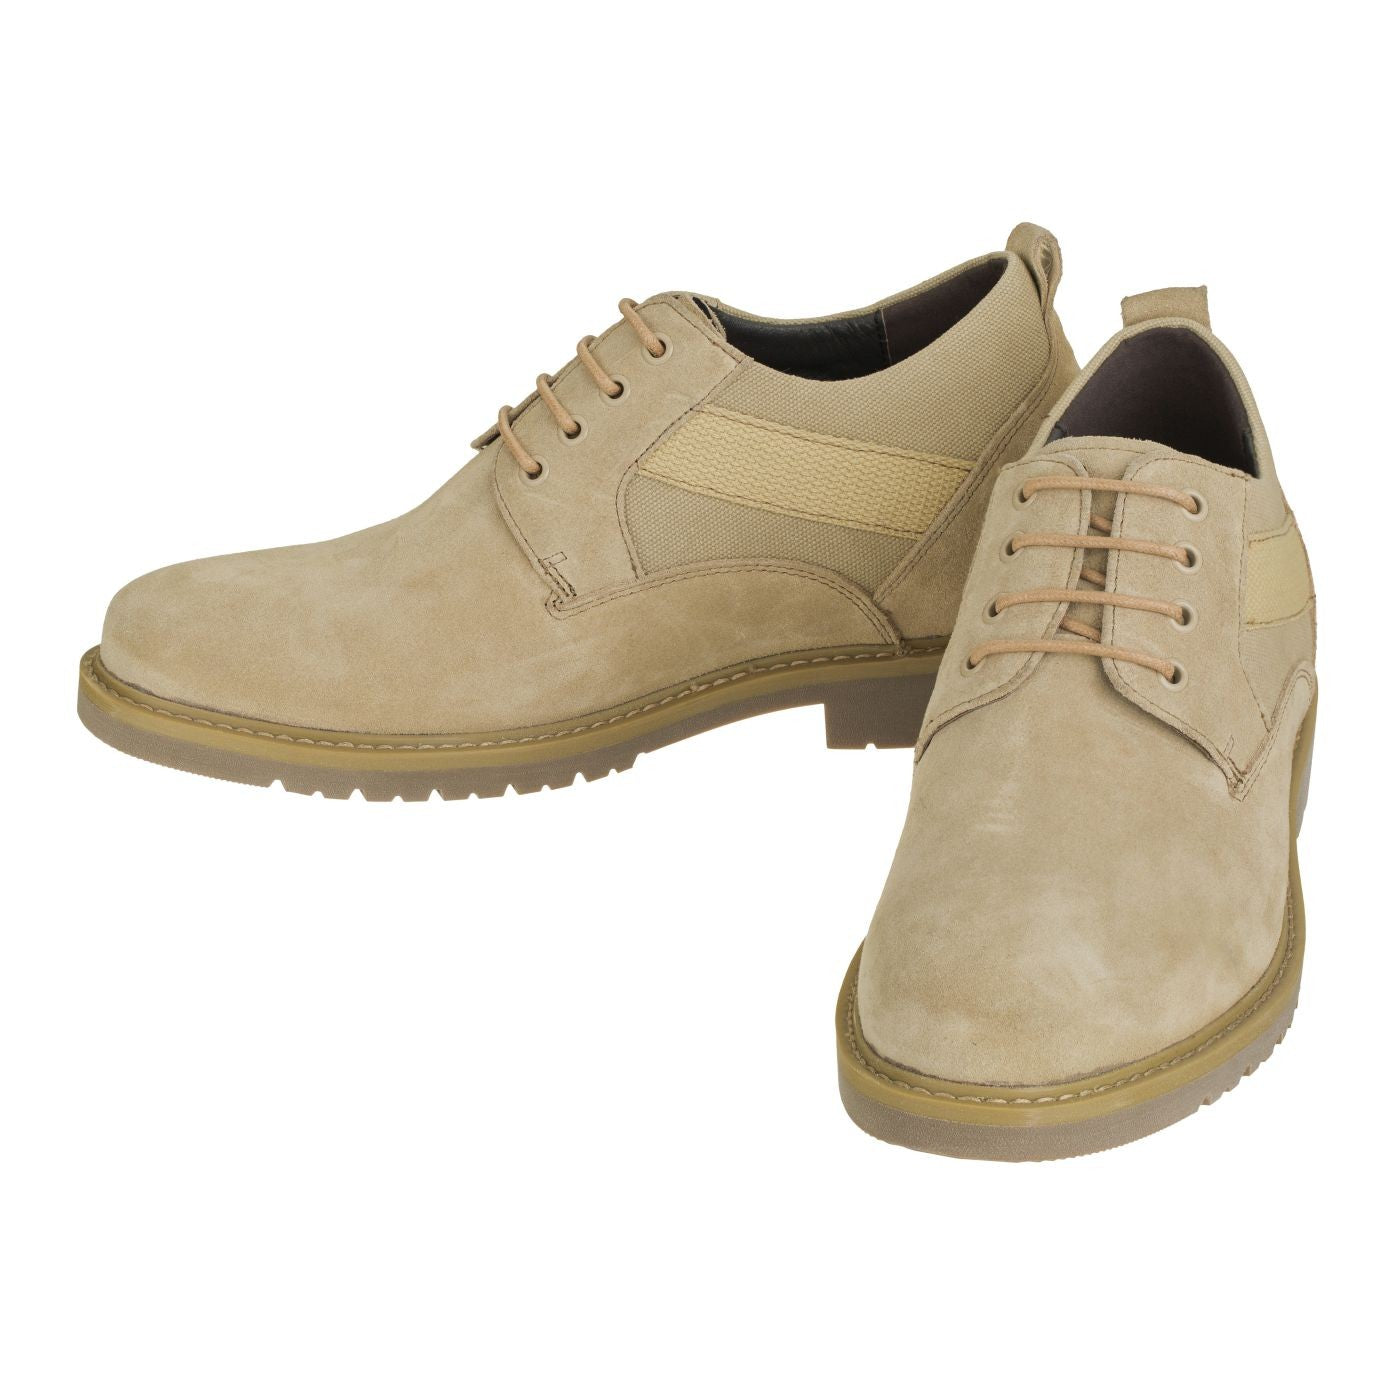 Elevator shoes height increase CALTO - S9013 - 3.0 Inches Taller (Desert Sand)